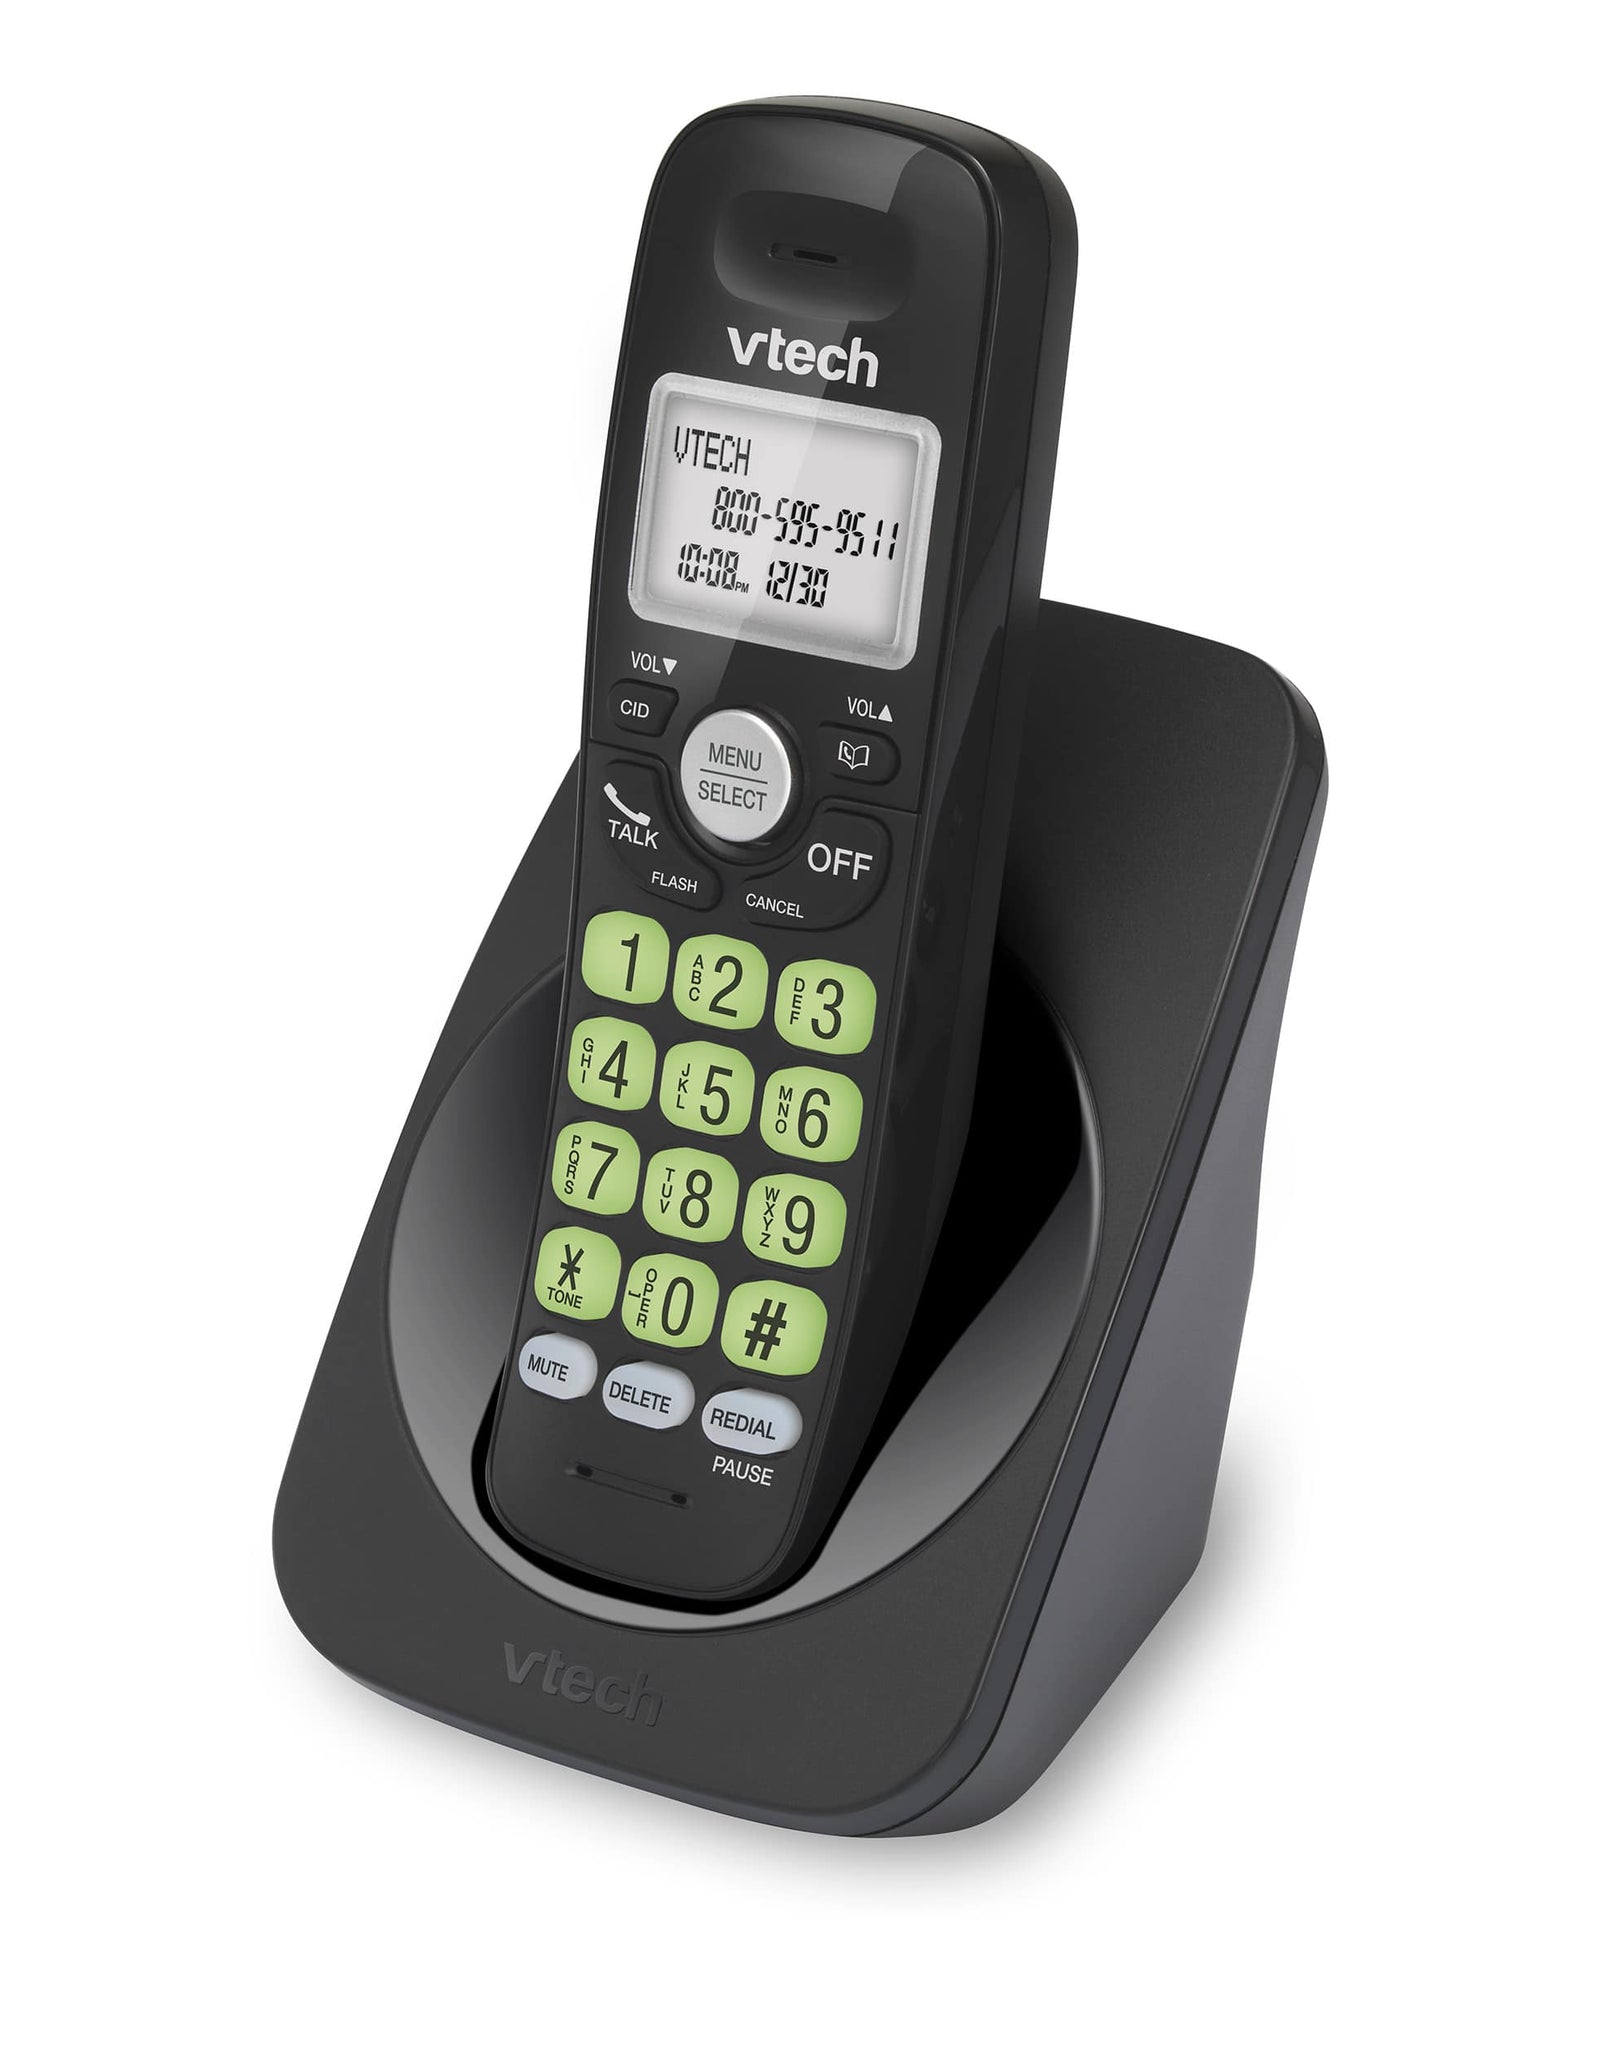 VTECH DECT 6.0 Cordless Phone, Black - with Full Duplex Speakerphone and Caller ID/Call Waiting